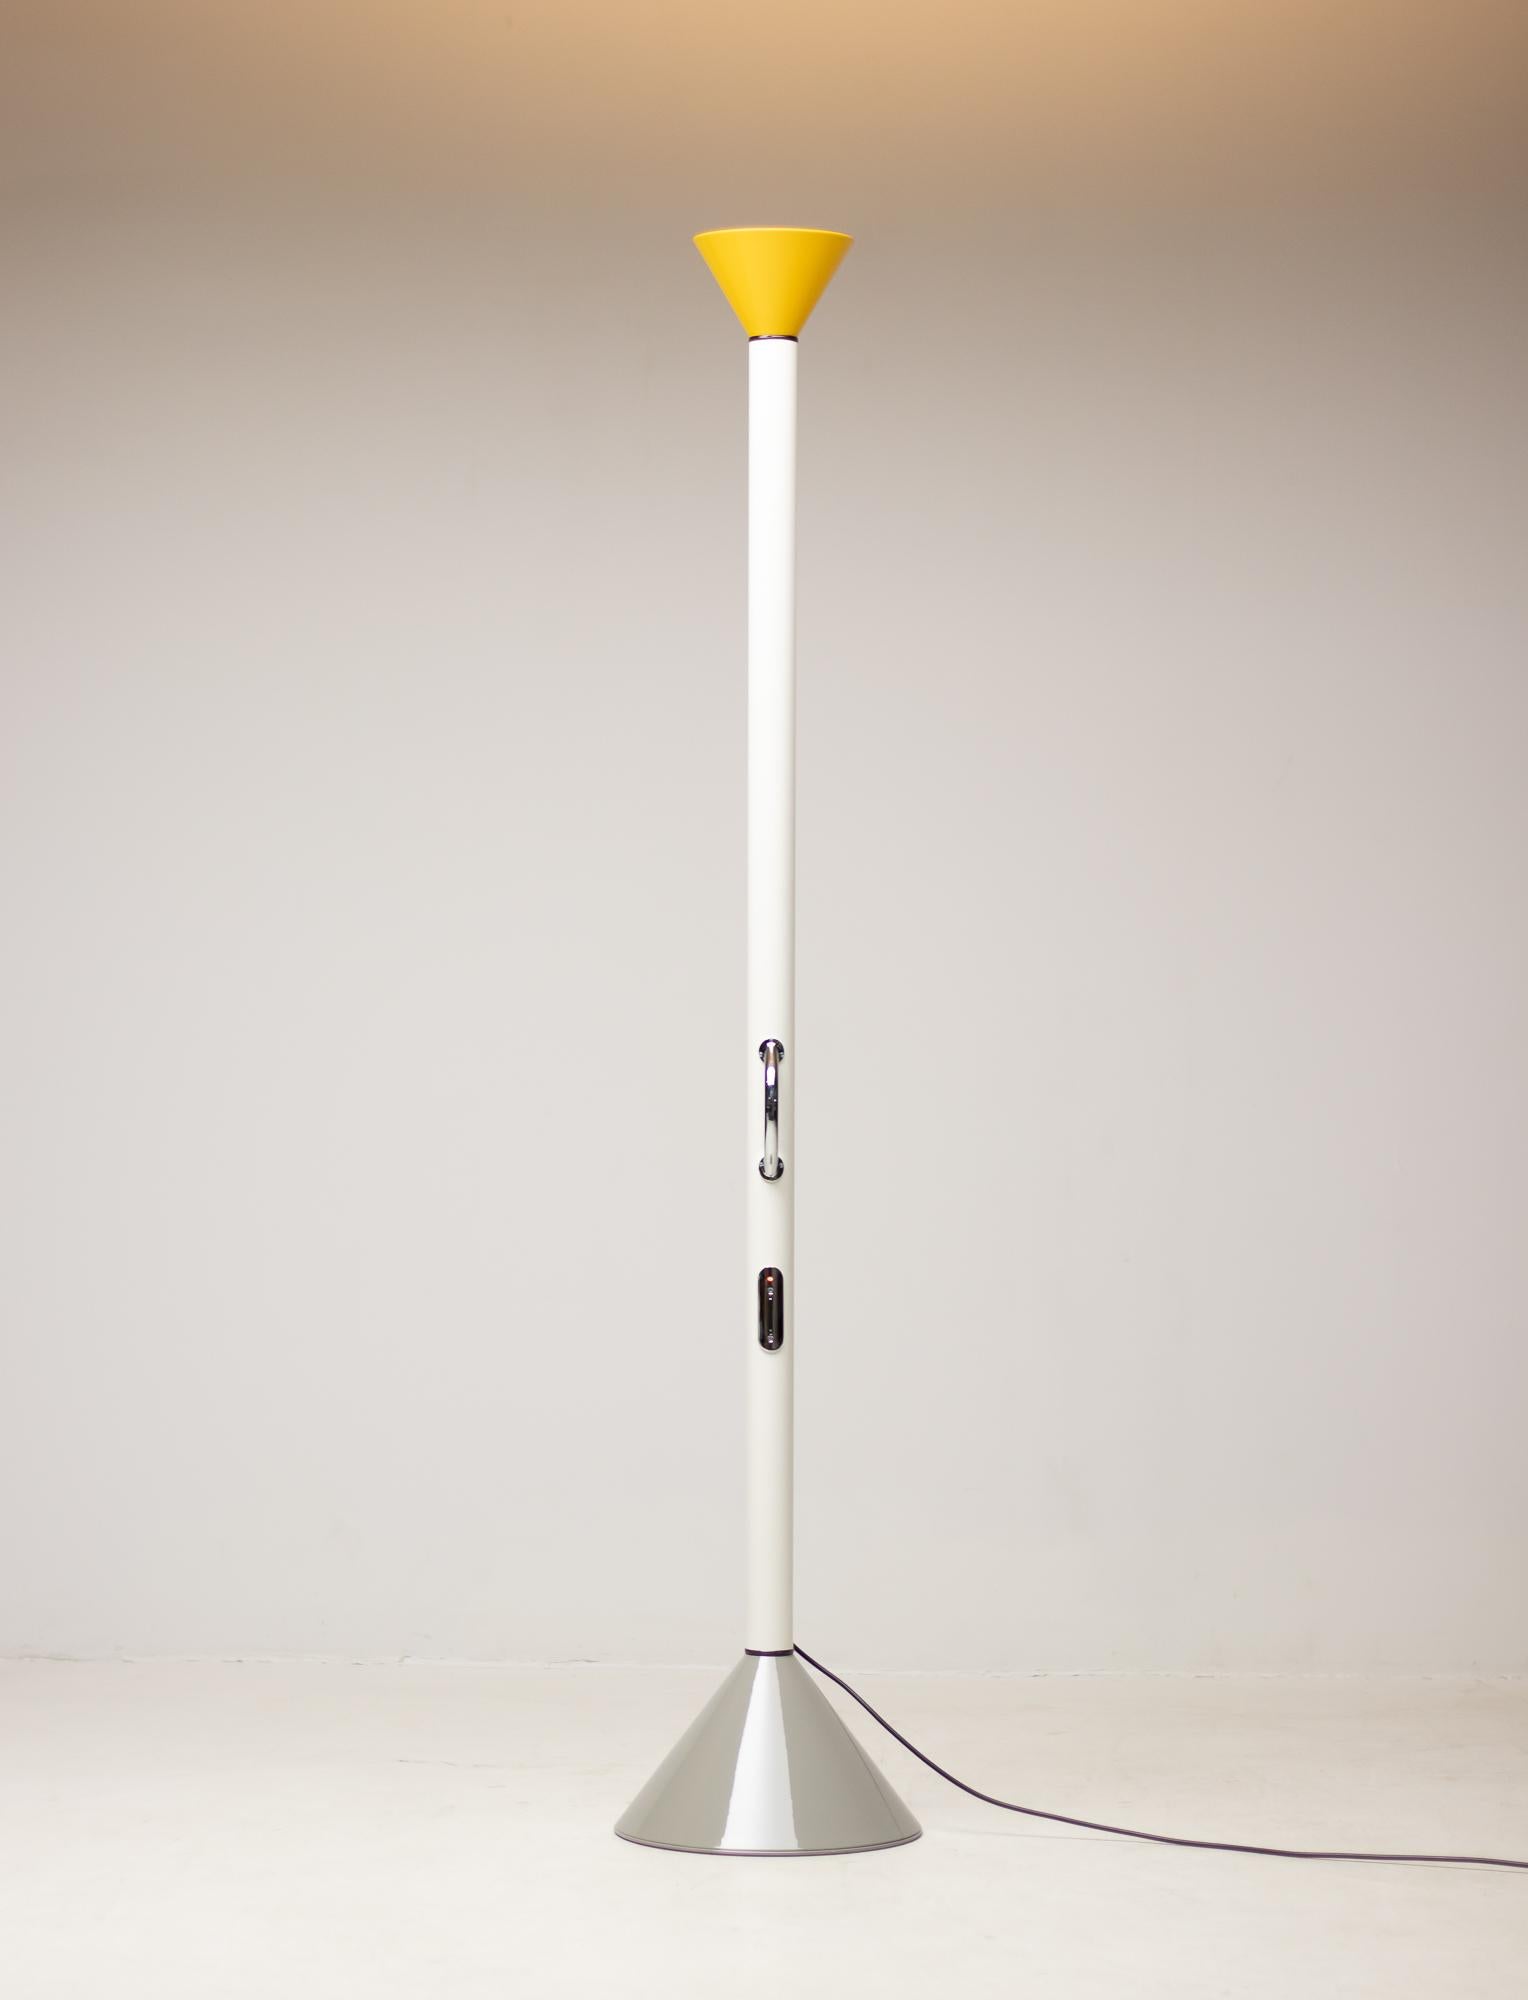 Limited Edition Callimaco floor lamp by Ettore Sottsass in grey, white and yellow.
Callimaco was designed by Ettore Sottsass for Artemide in 1982 and became a true icon of 1980s.
It's an uplighter in LED version.

The lamp lacks all unnecessary